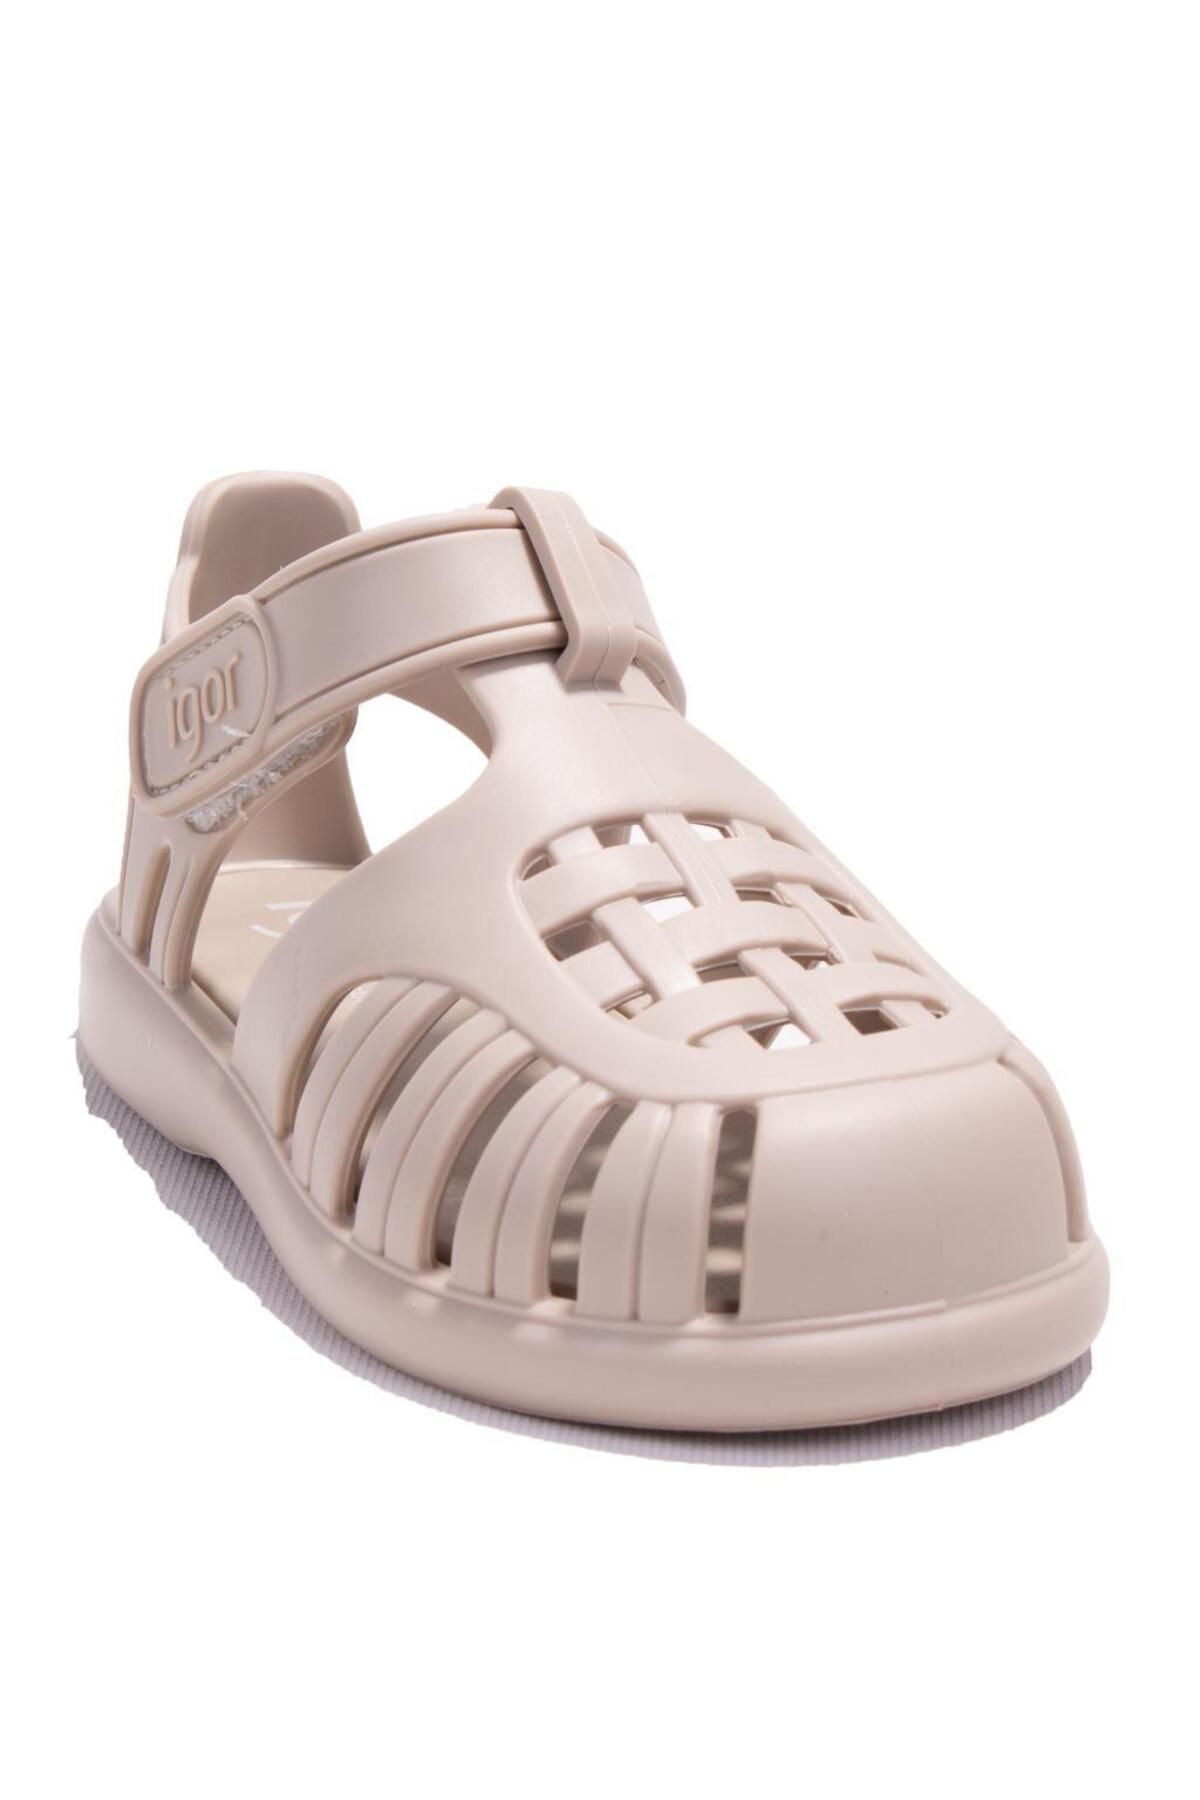 IGOR S10271C TOBBY SOLID KUMO ORTOPICAL DAILY Sandals Boy